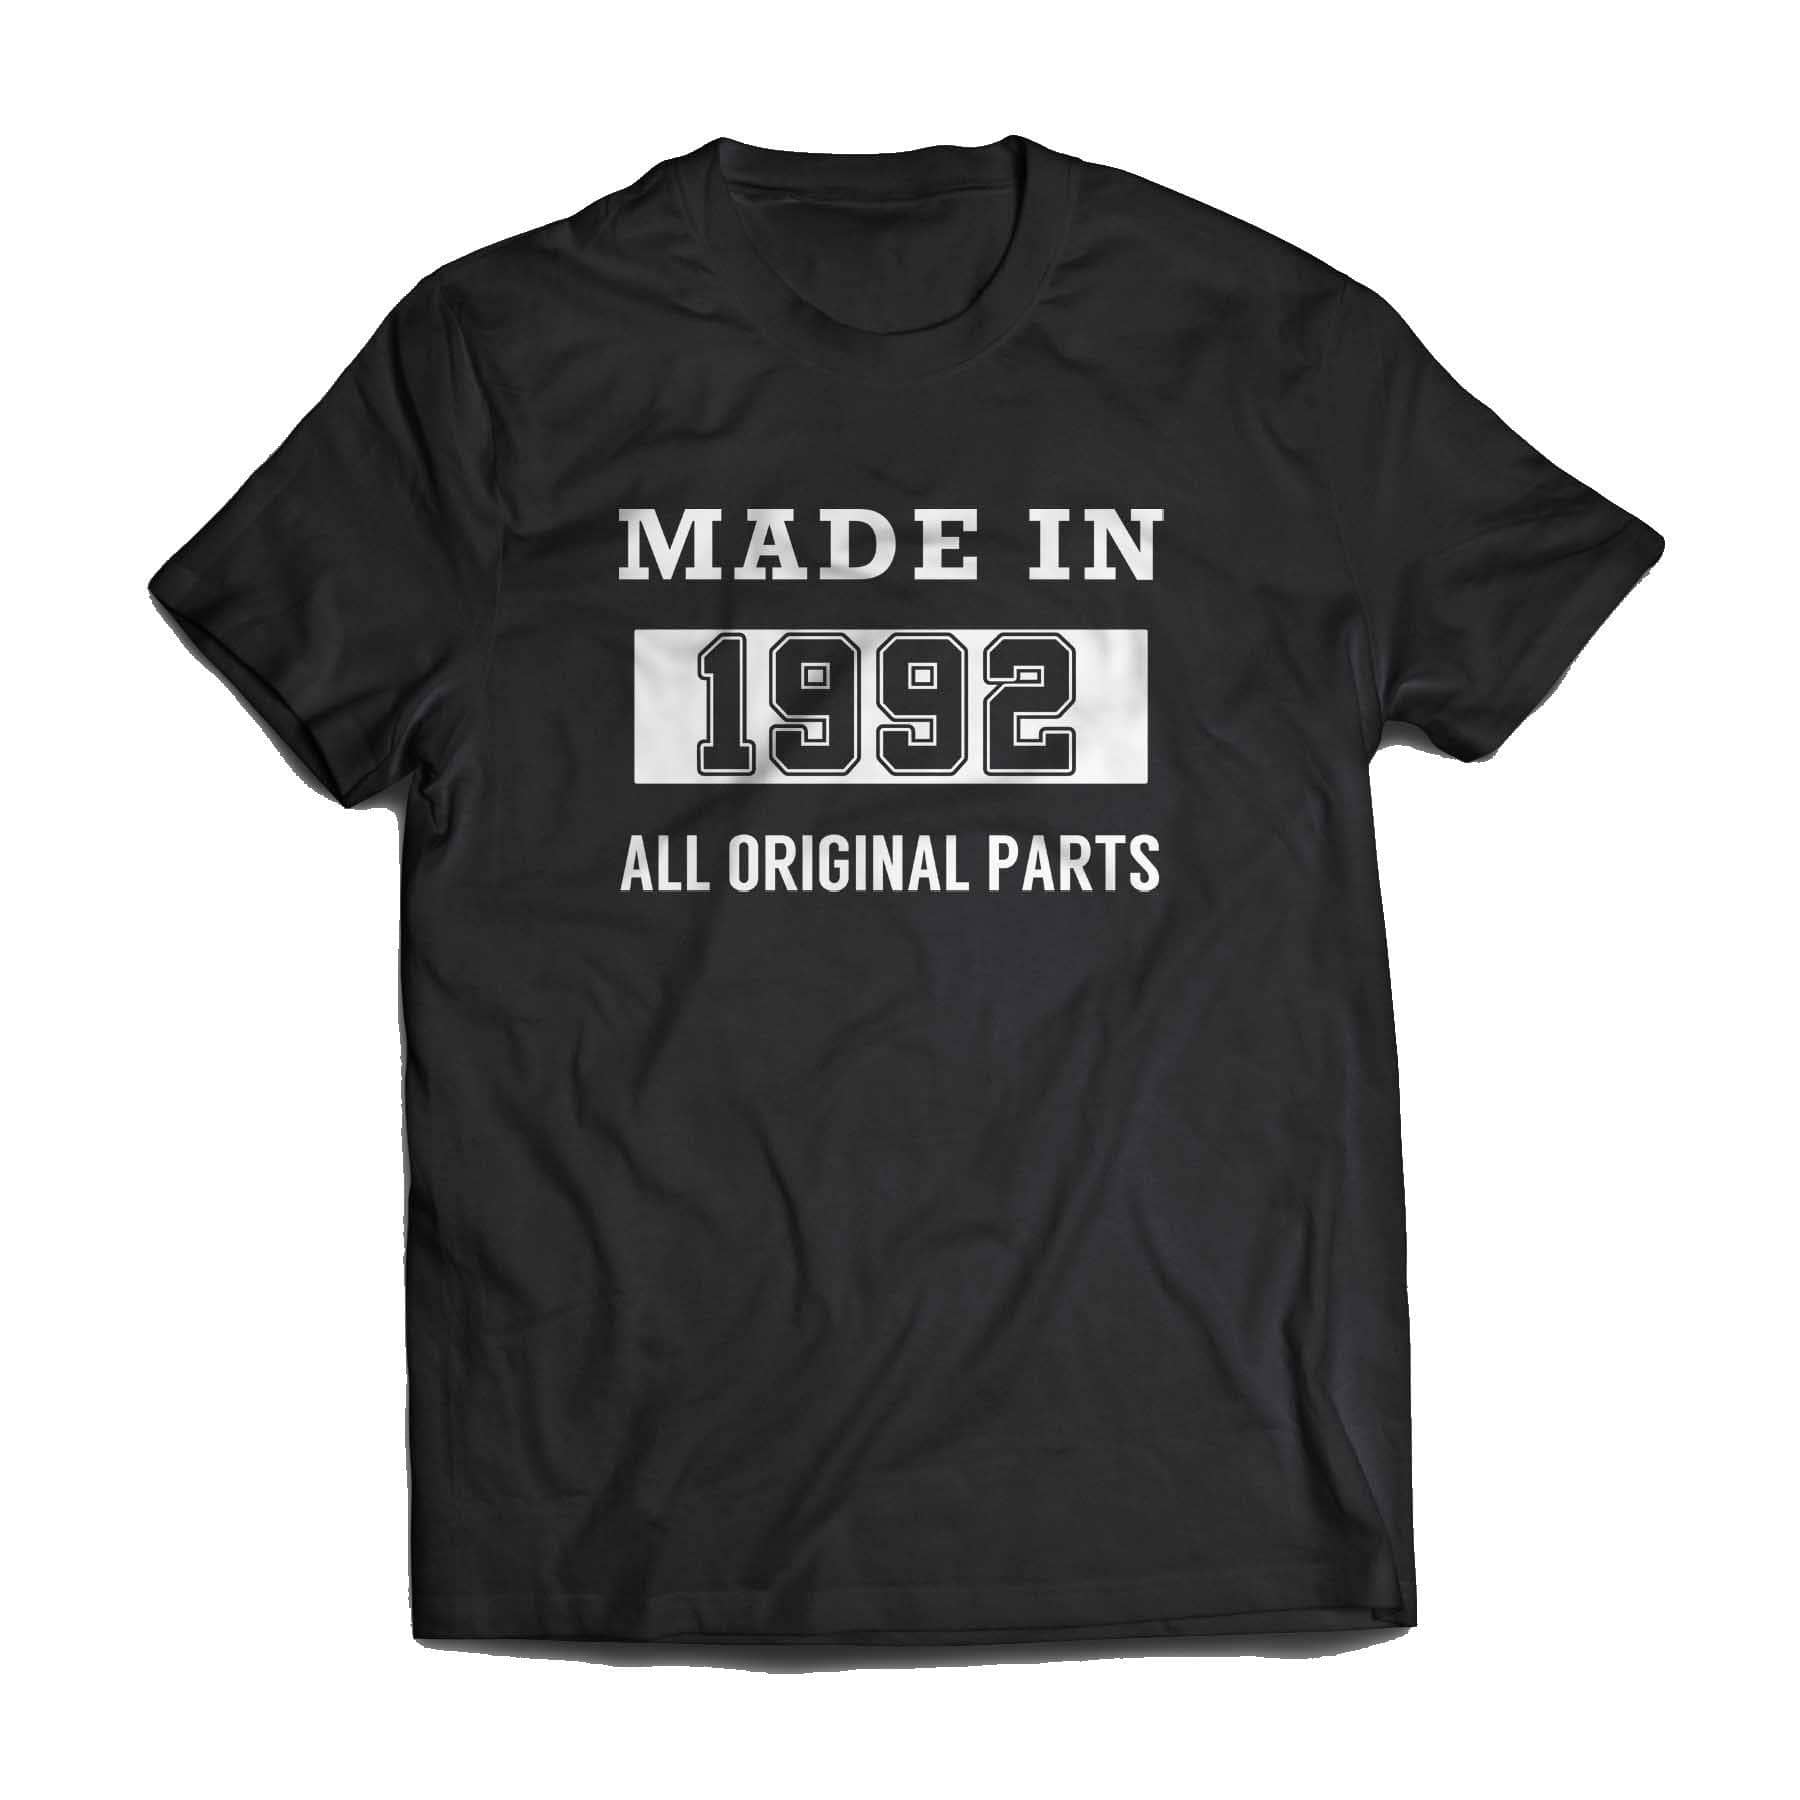 Made In 1992